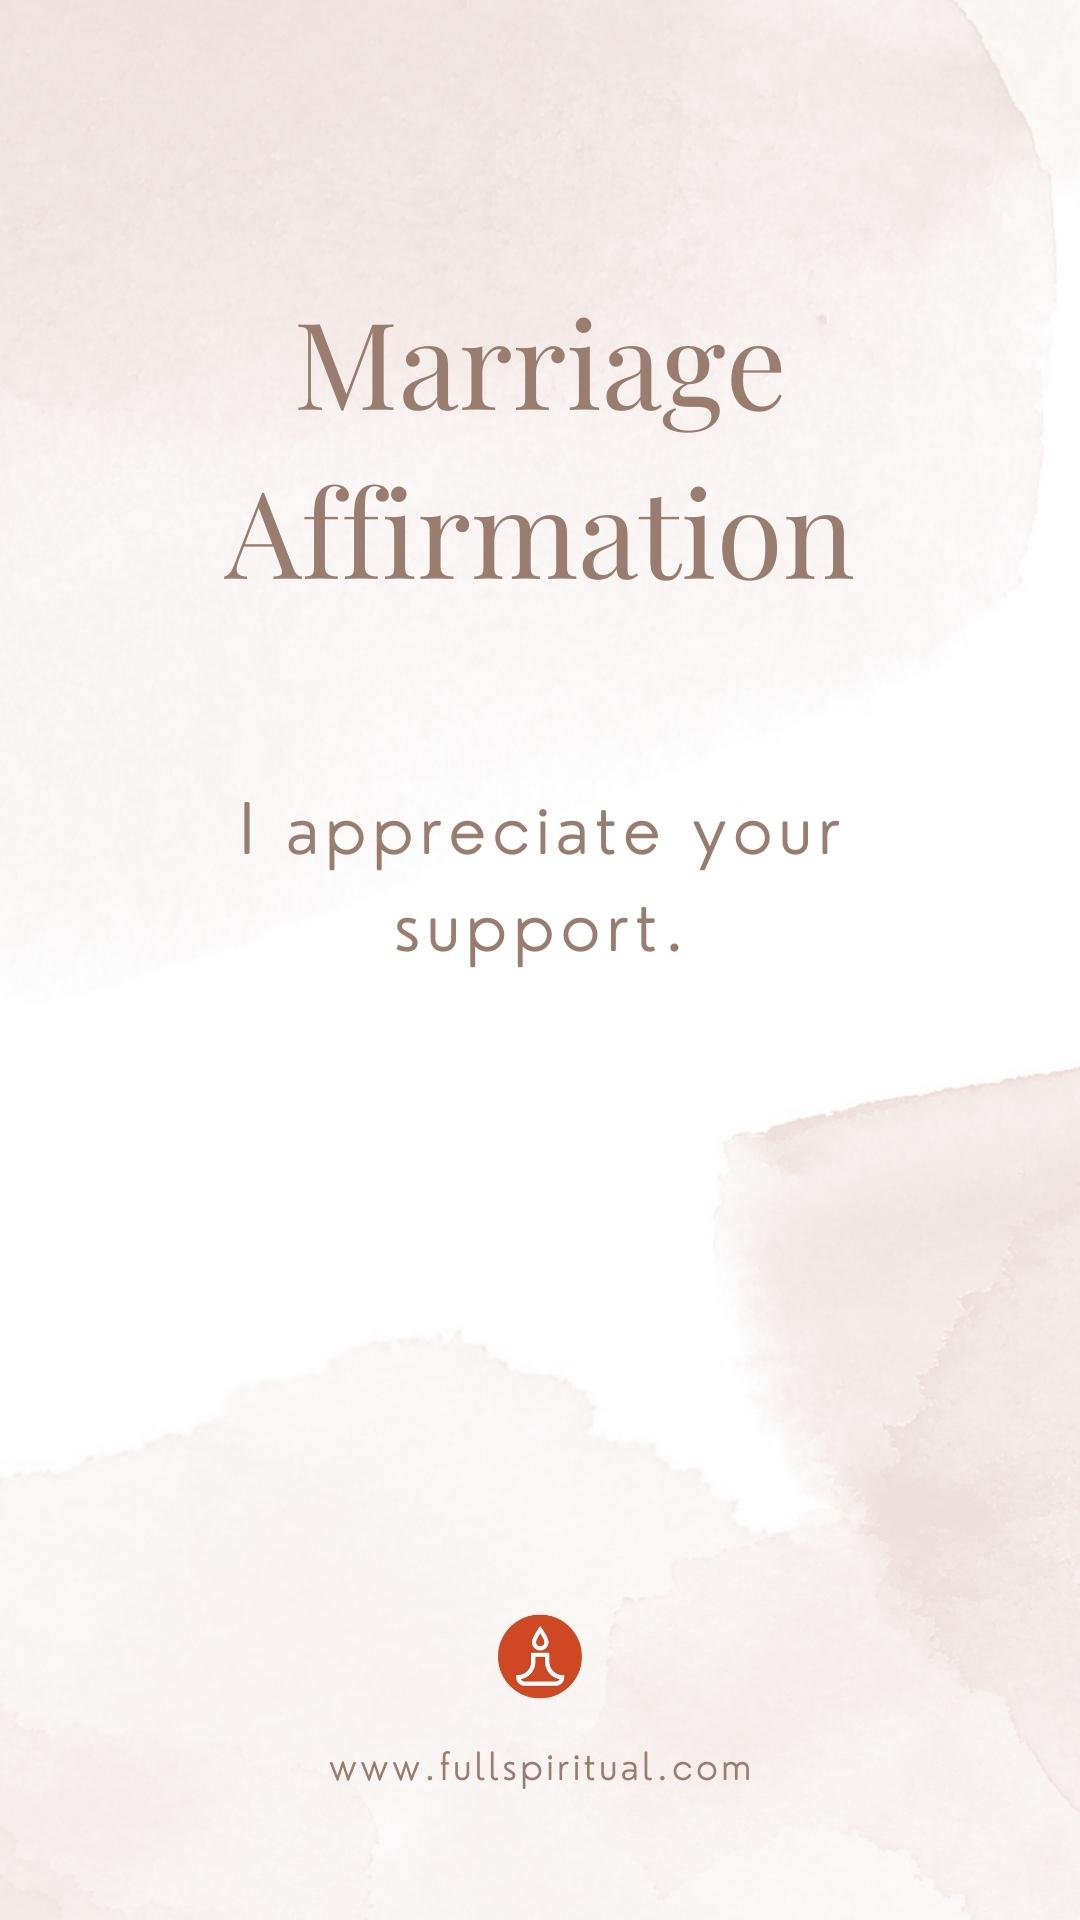 Marriage appriciate affirmation